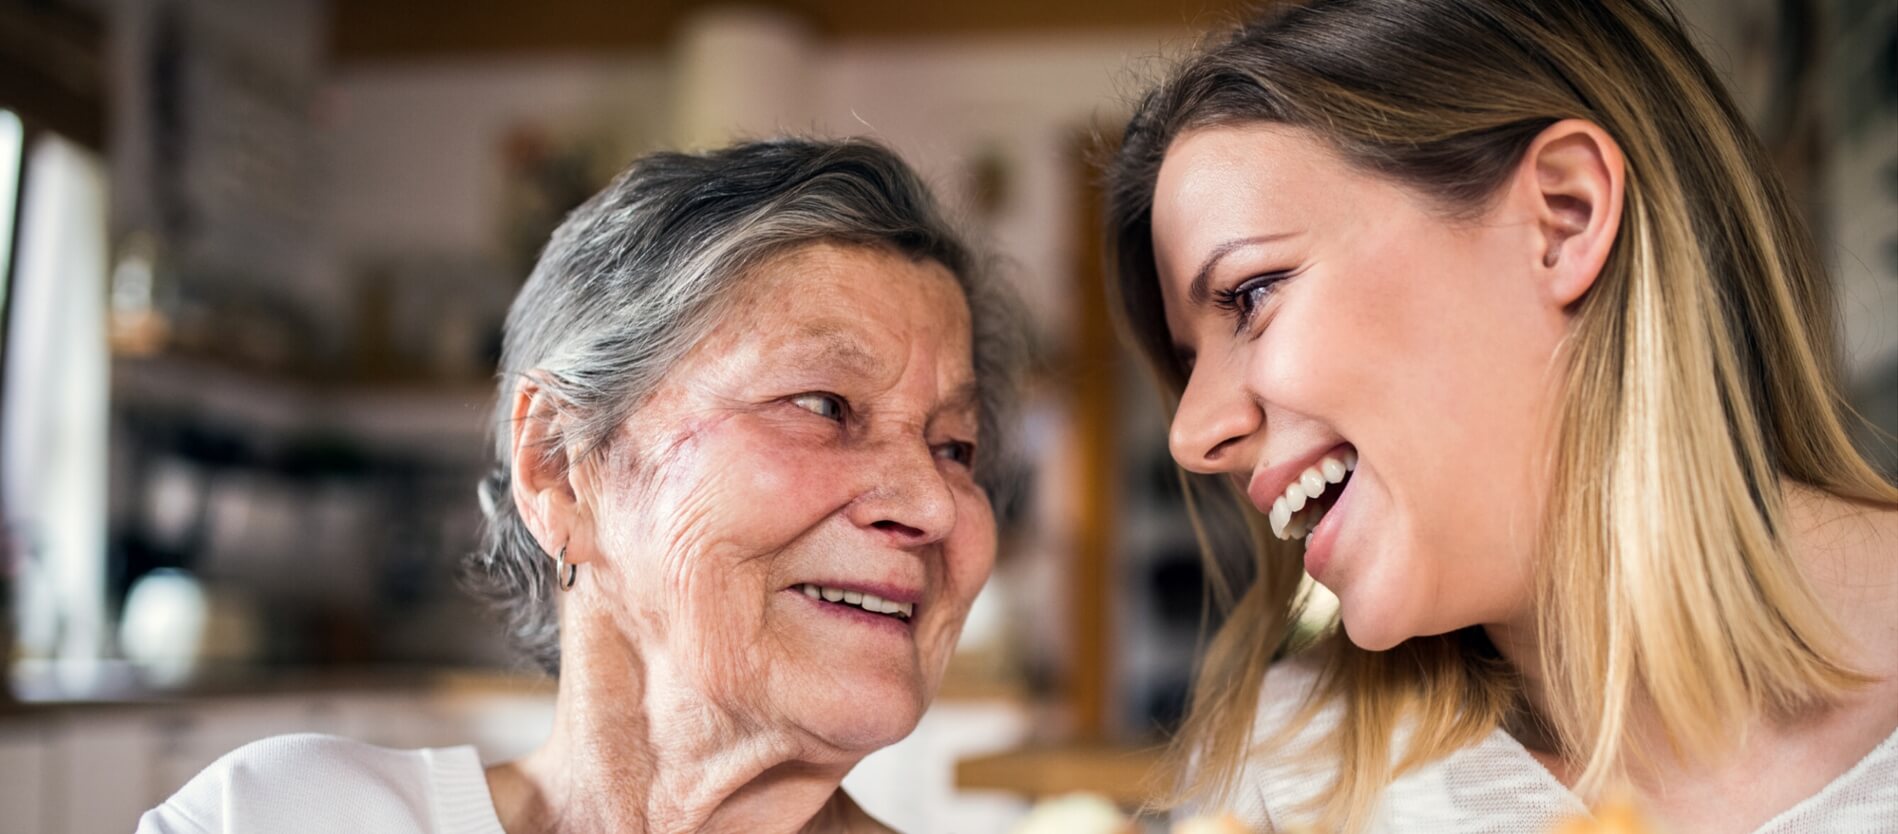 An older women looking and laughing with a younger women